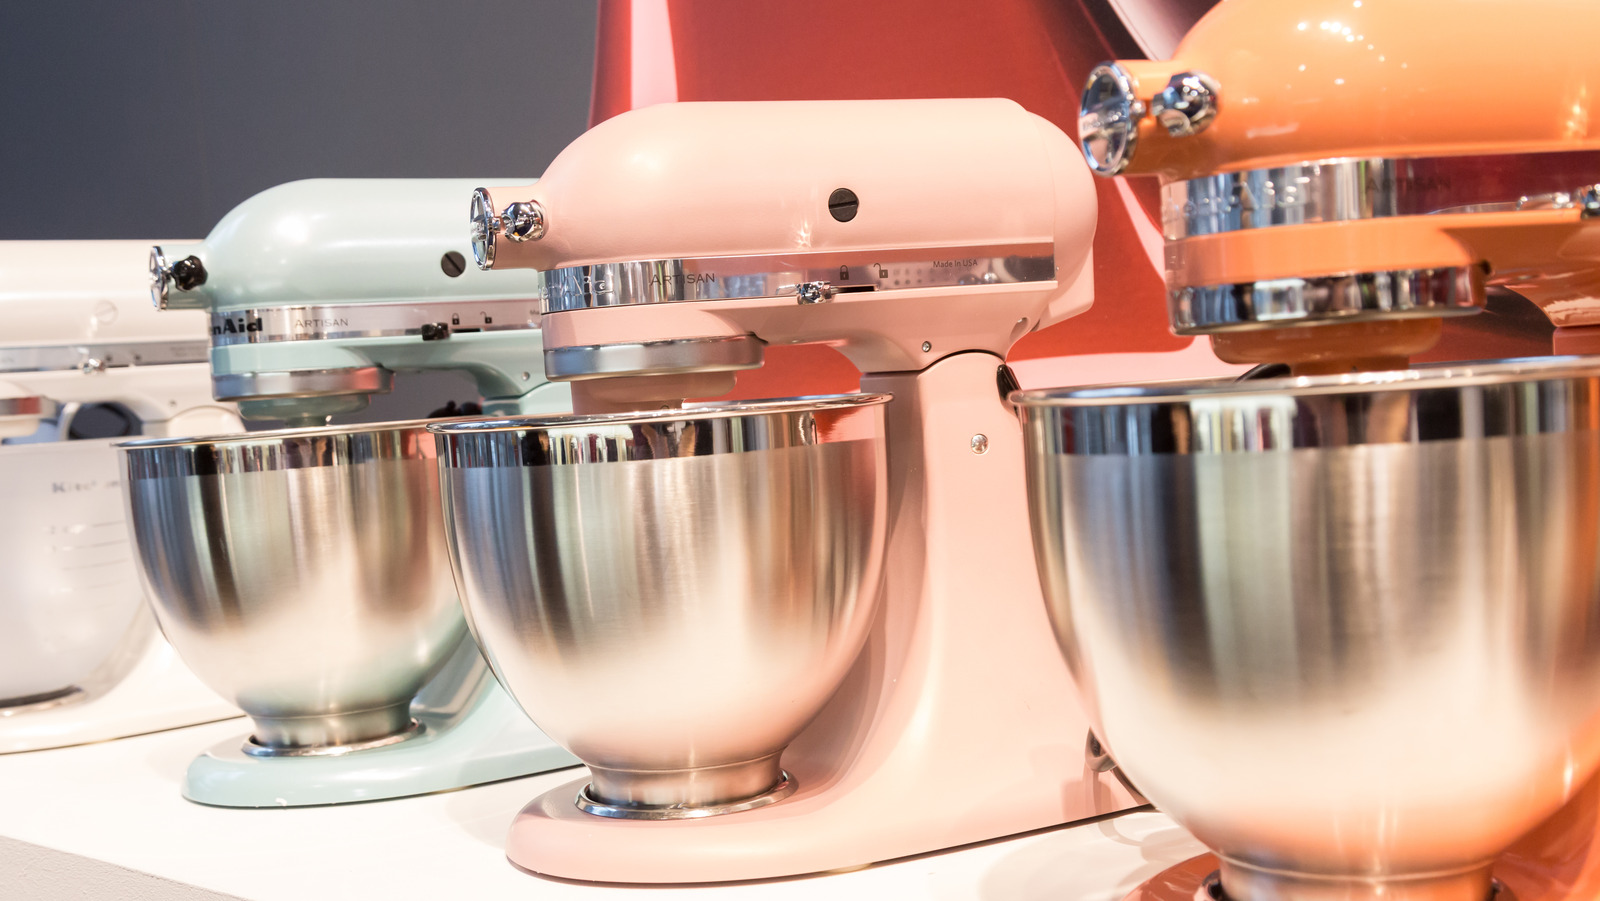 Does The Bosch Mixer Live Up To The Hype? 